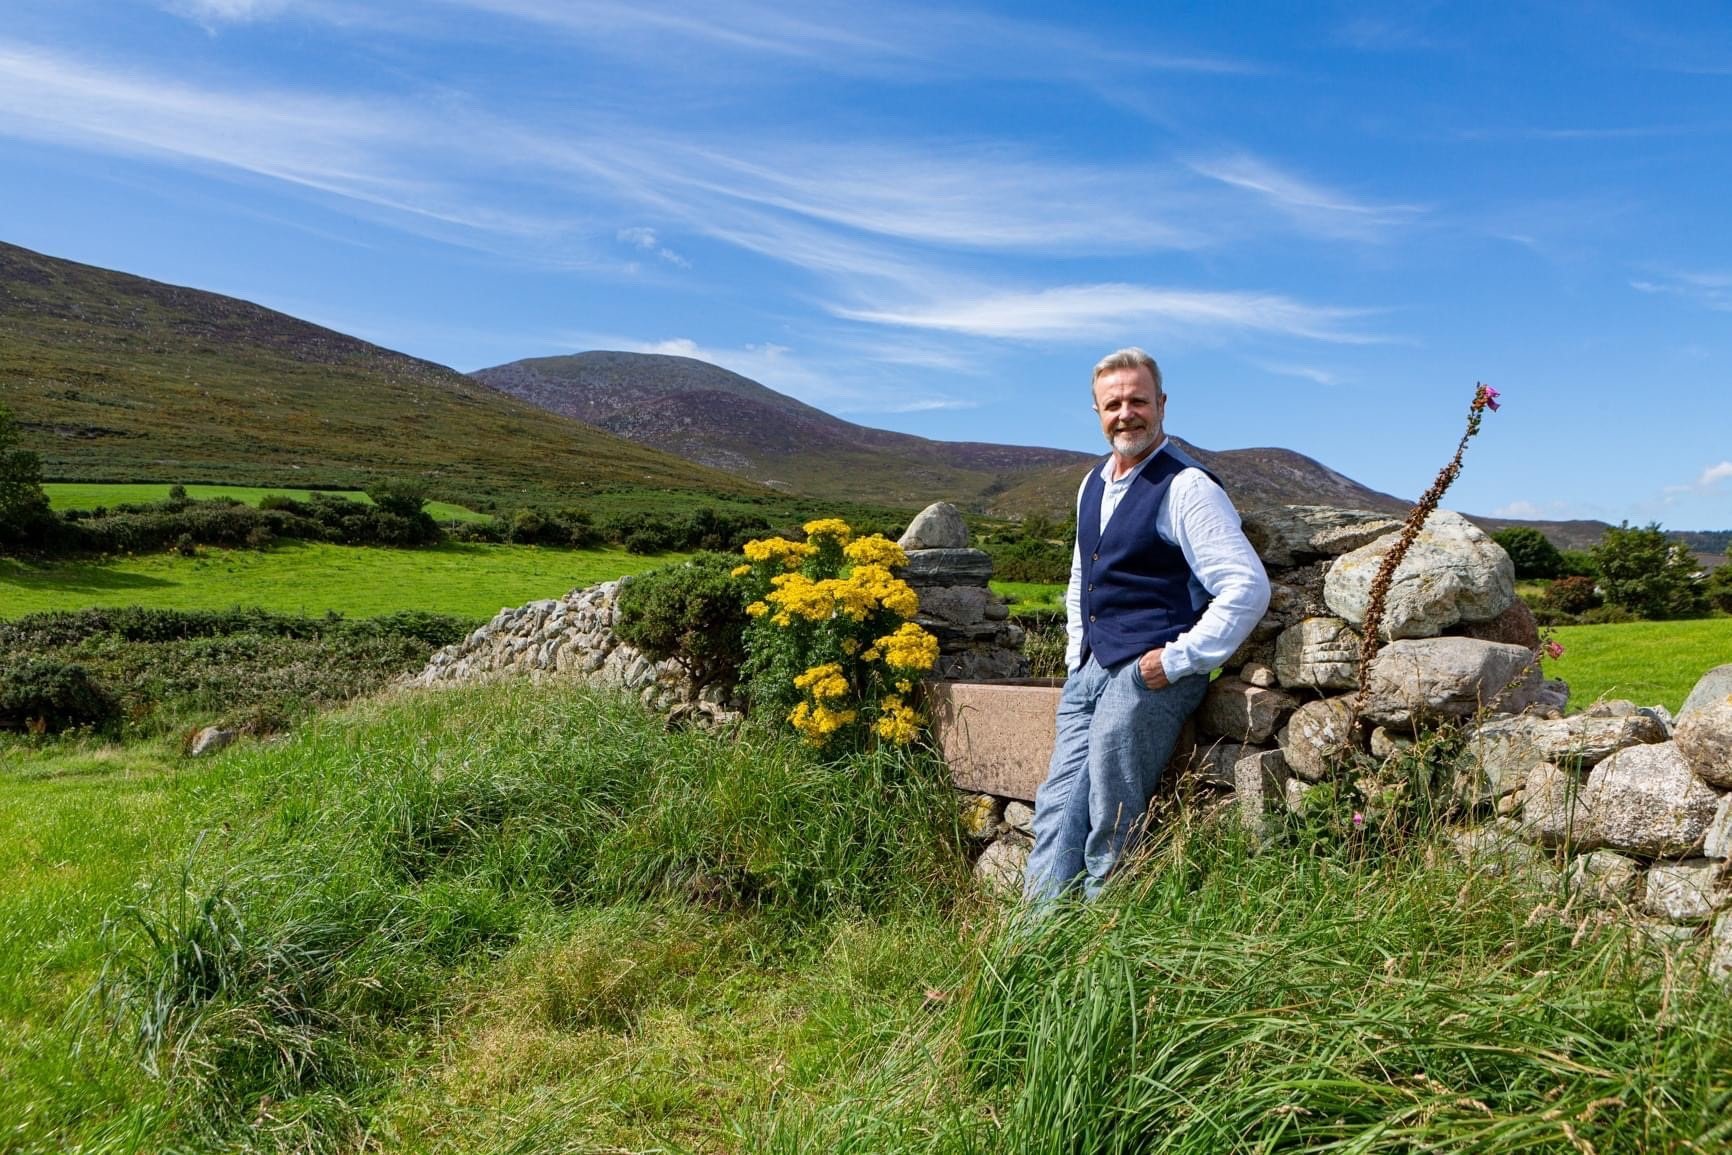 A white man with gray hair and facial hear wears a blue vest, light blue collared shirt and jeans stand in front of a grassy fiend with flowers and mountains in the background